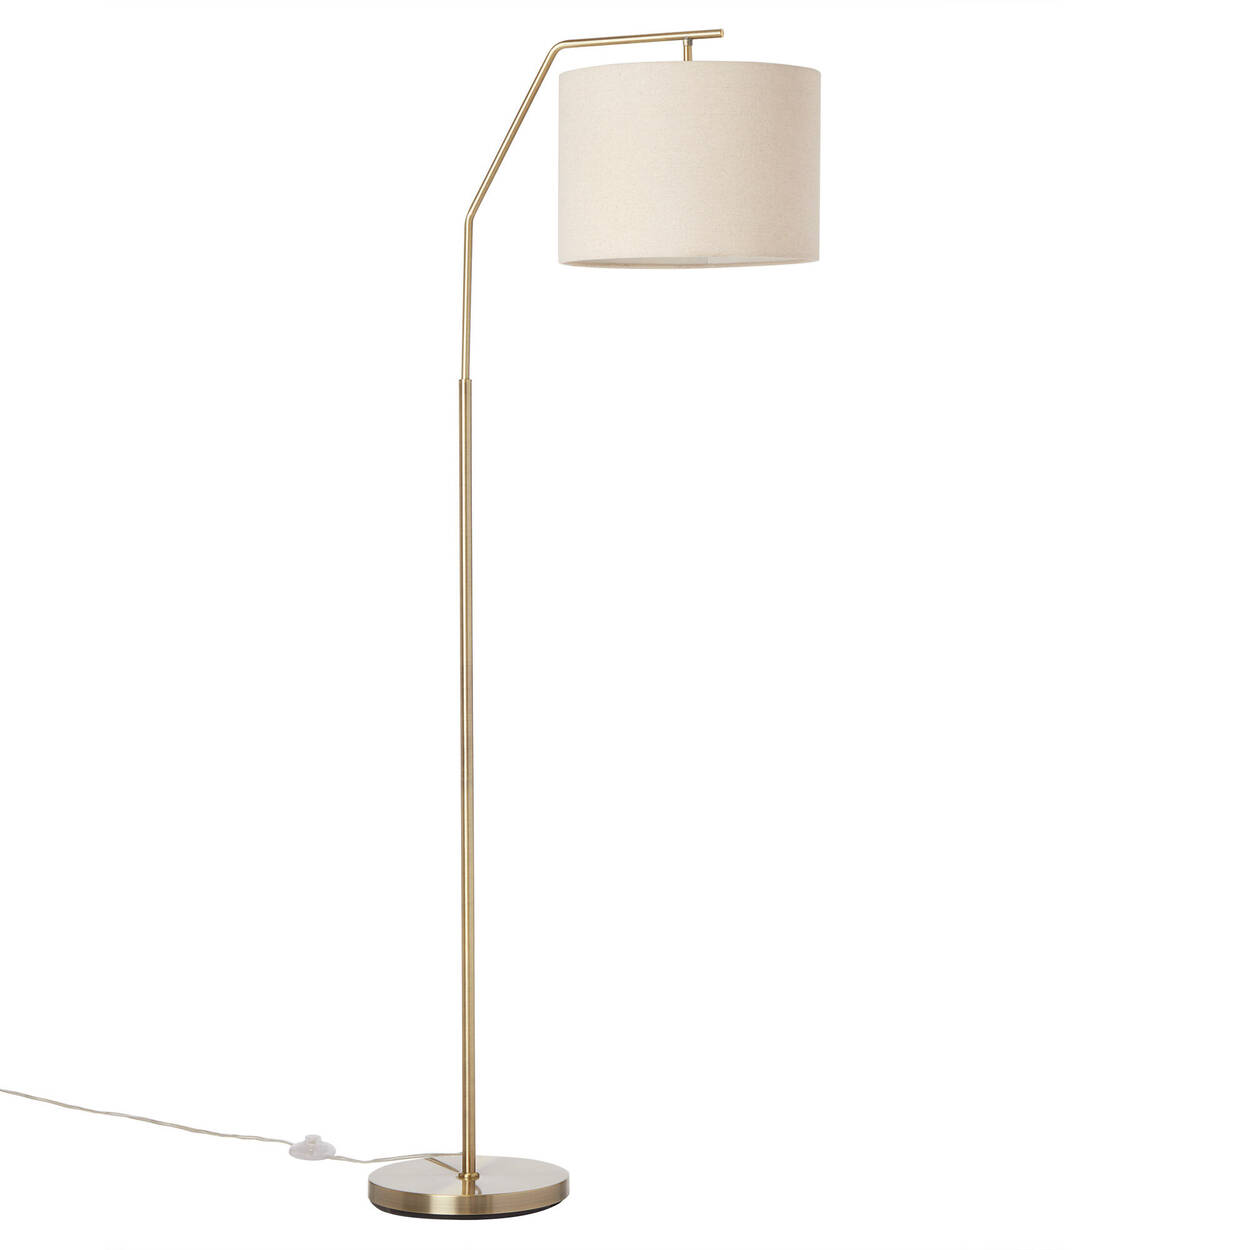 Floor Lamp with Cream Shade and Gold Base